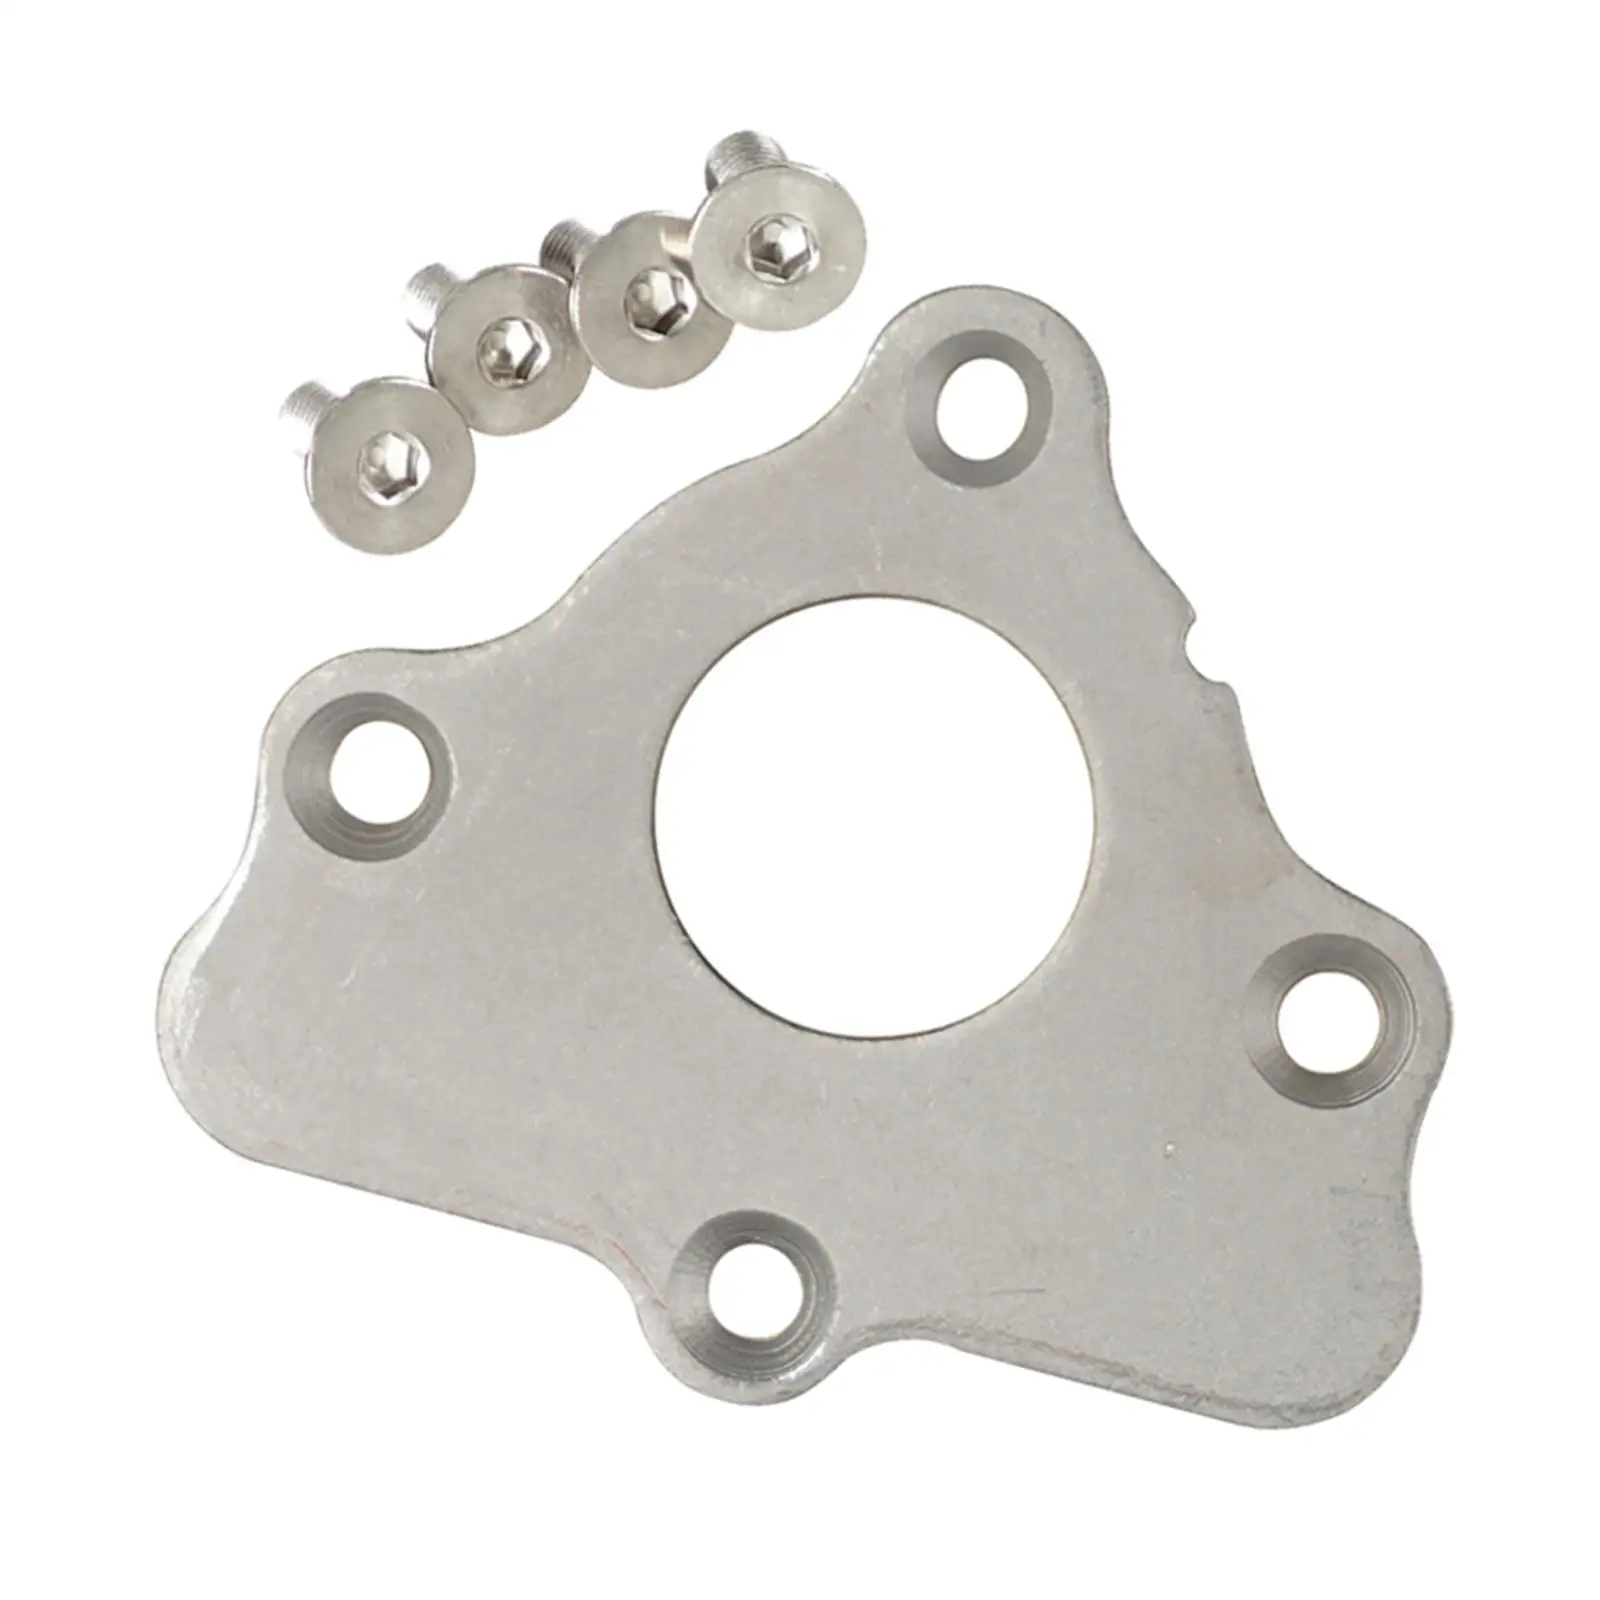 Camshaft Thrust Retainer for LS Series Engines Direct Replaces